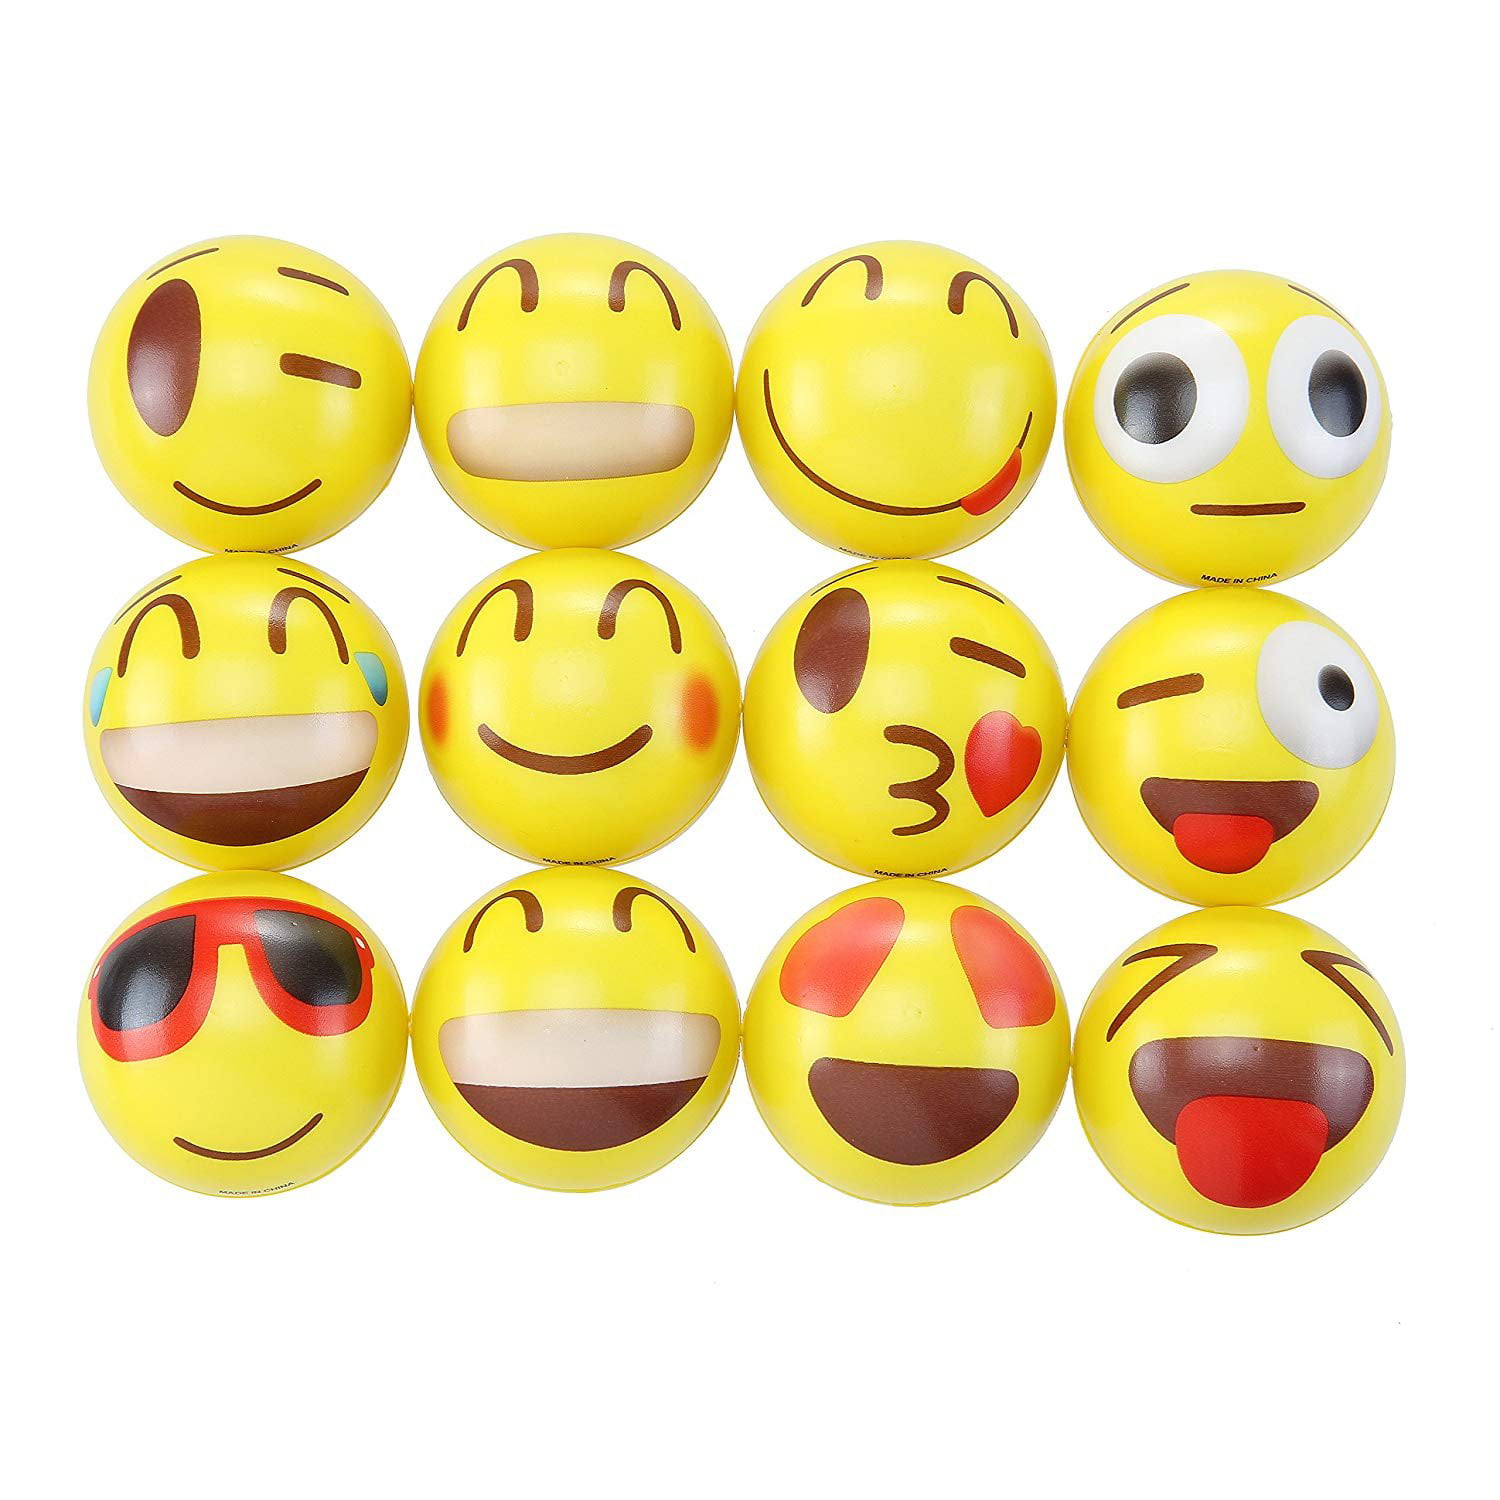 Emoji Stress Balls Squeezing Stress Relief and Fidget Toy  Smiley Face Pack of 3 